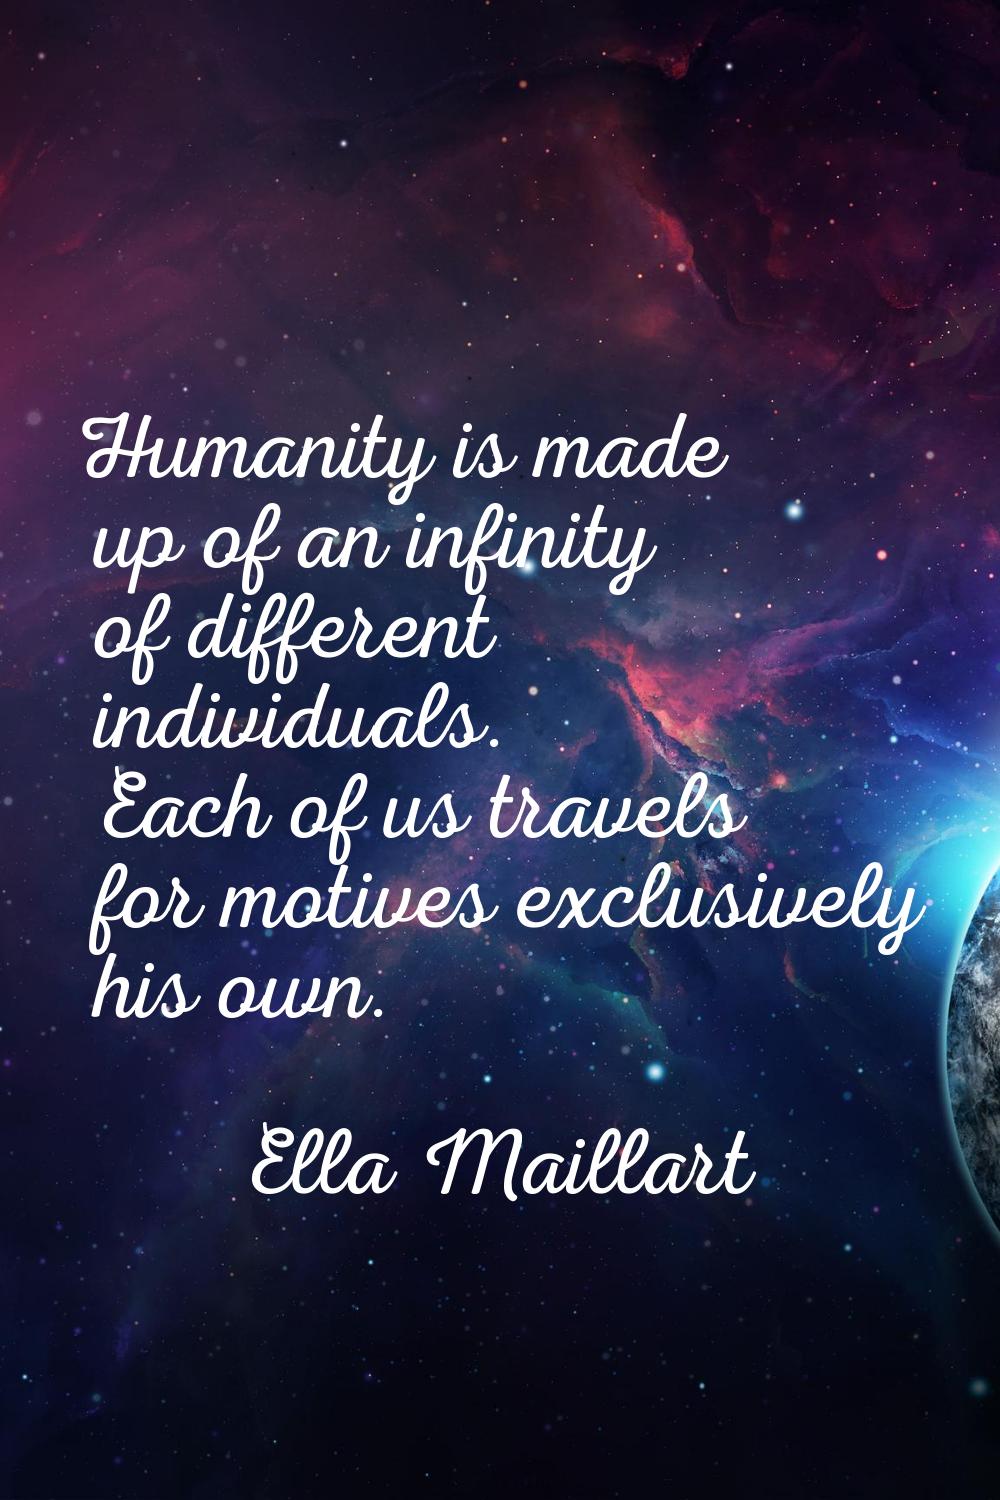 Humanity is made up of an infinity of different individuals. Each of us travels for motives exclusi